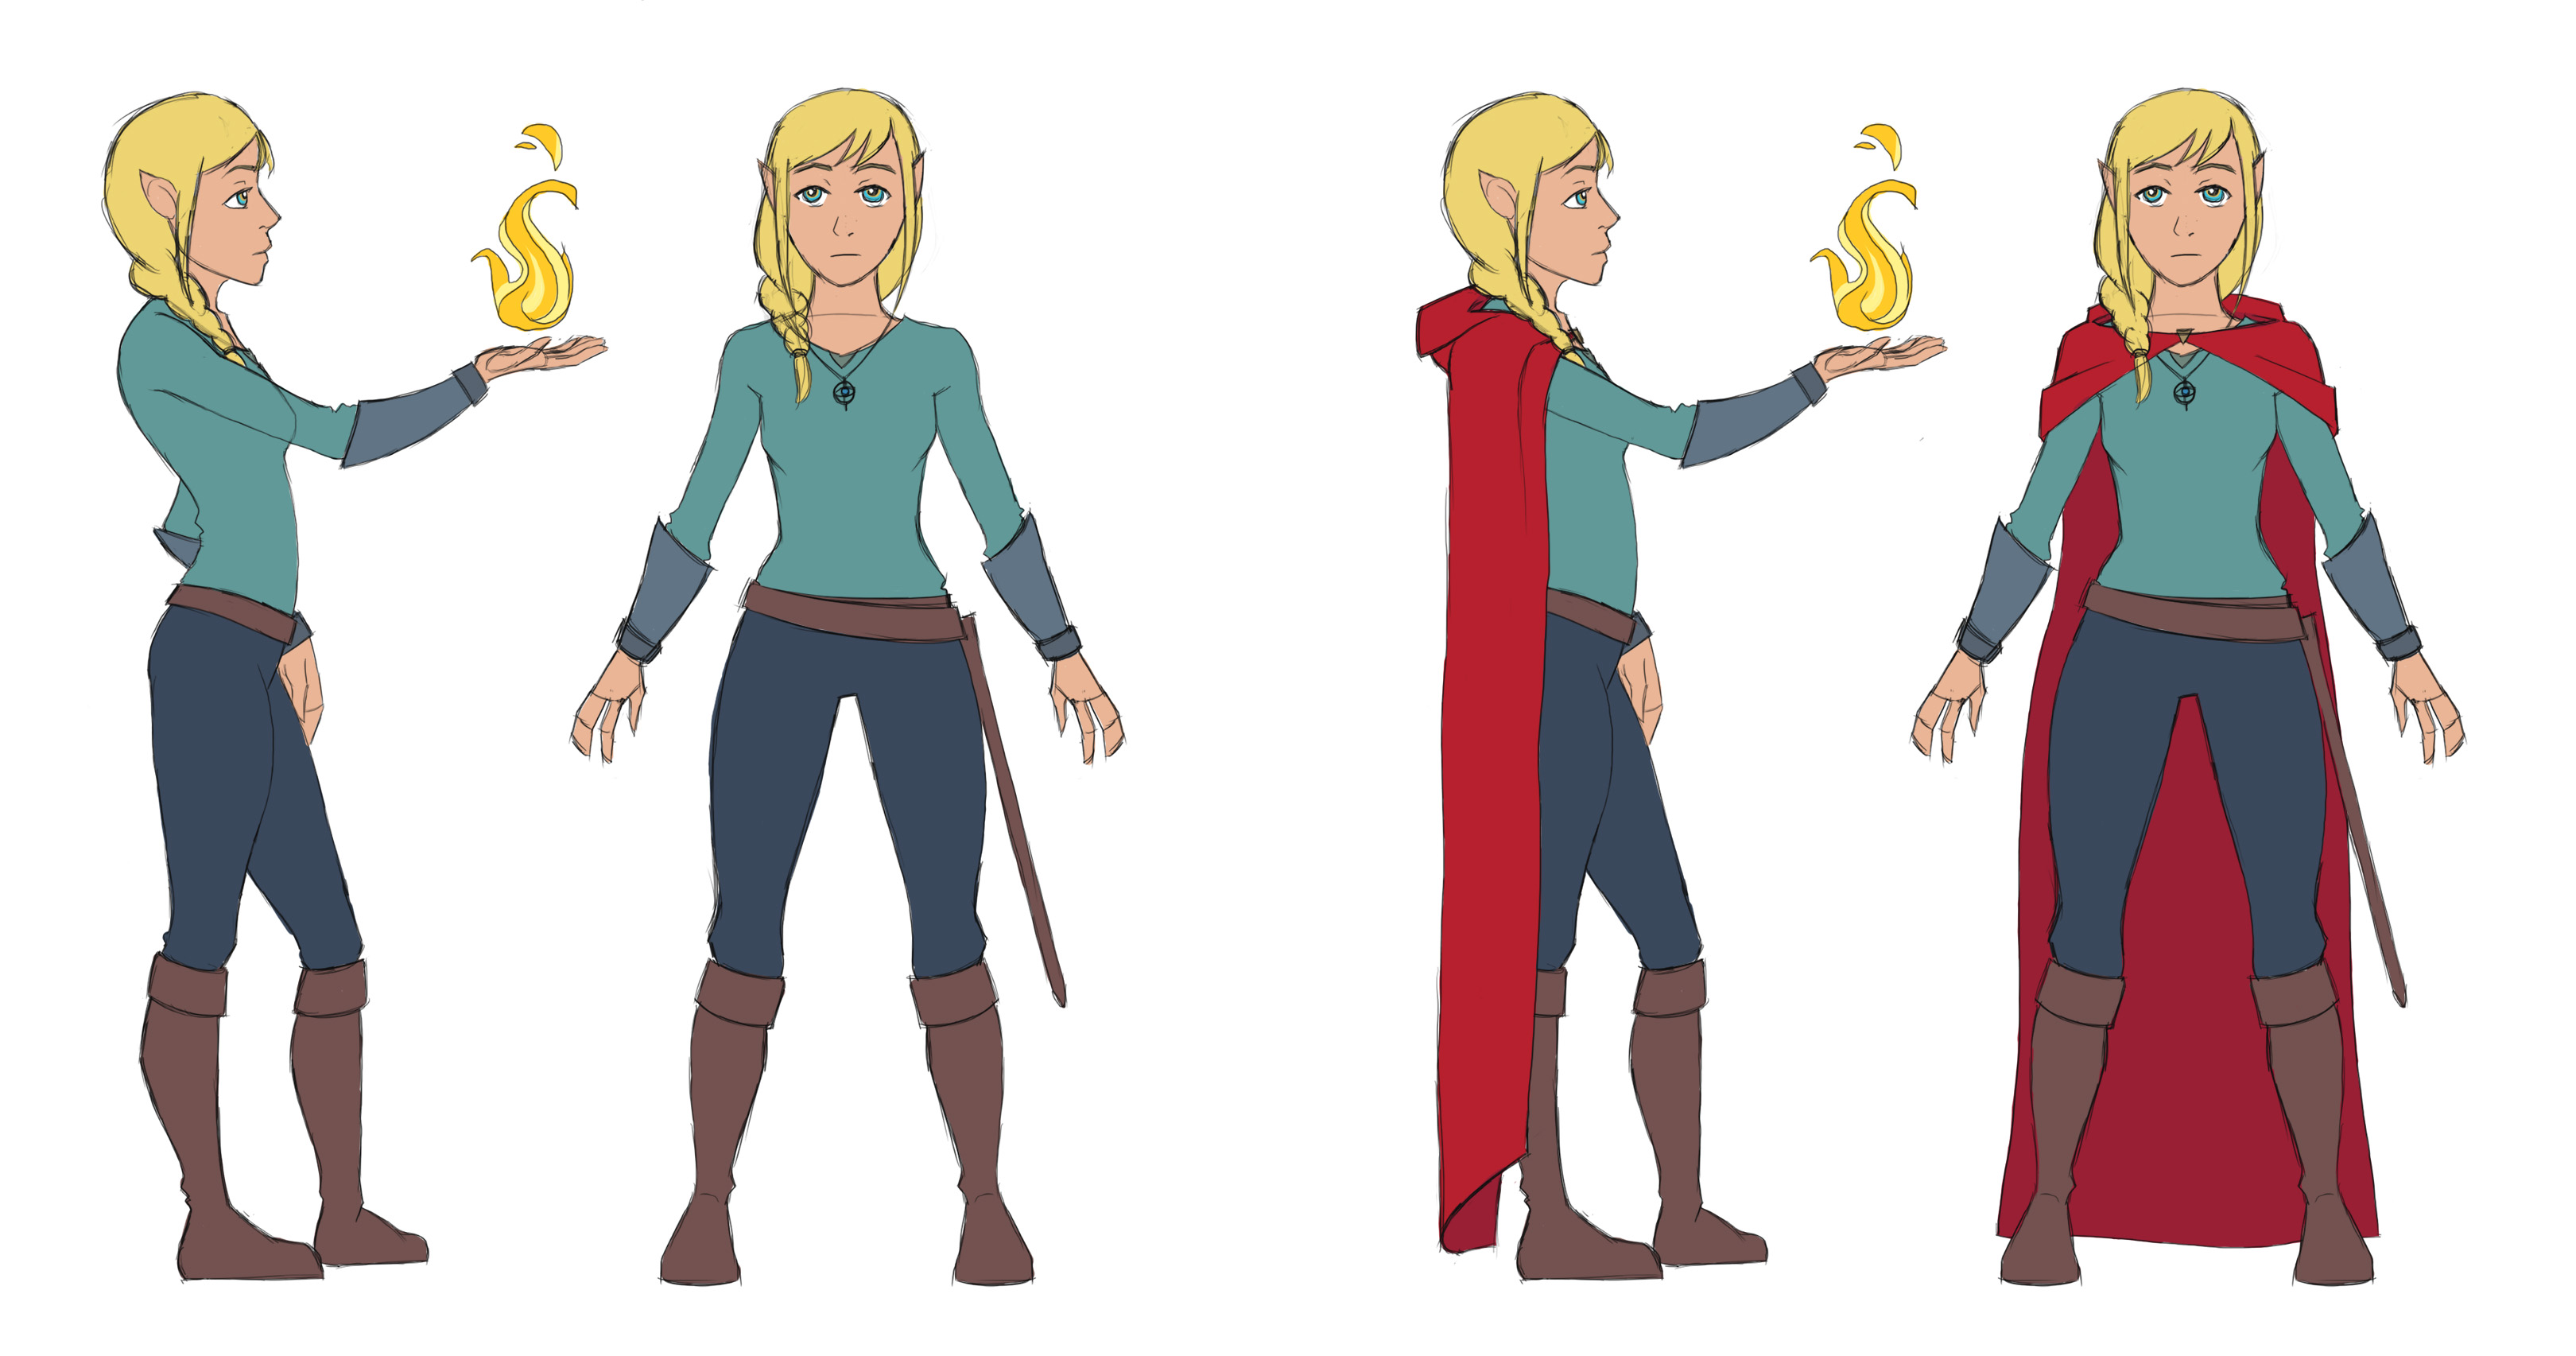 Average girl with gold-blonde hair and golden eyes. Her ears are slightly pointed. Donning a deep red cloak that acts as a cape, cool-themed shirt, gauntlets, and pants, as well as a sword belt and boots. Her hair is braided and to the side. She wields fire in her right hand.